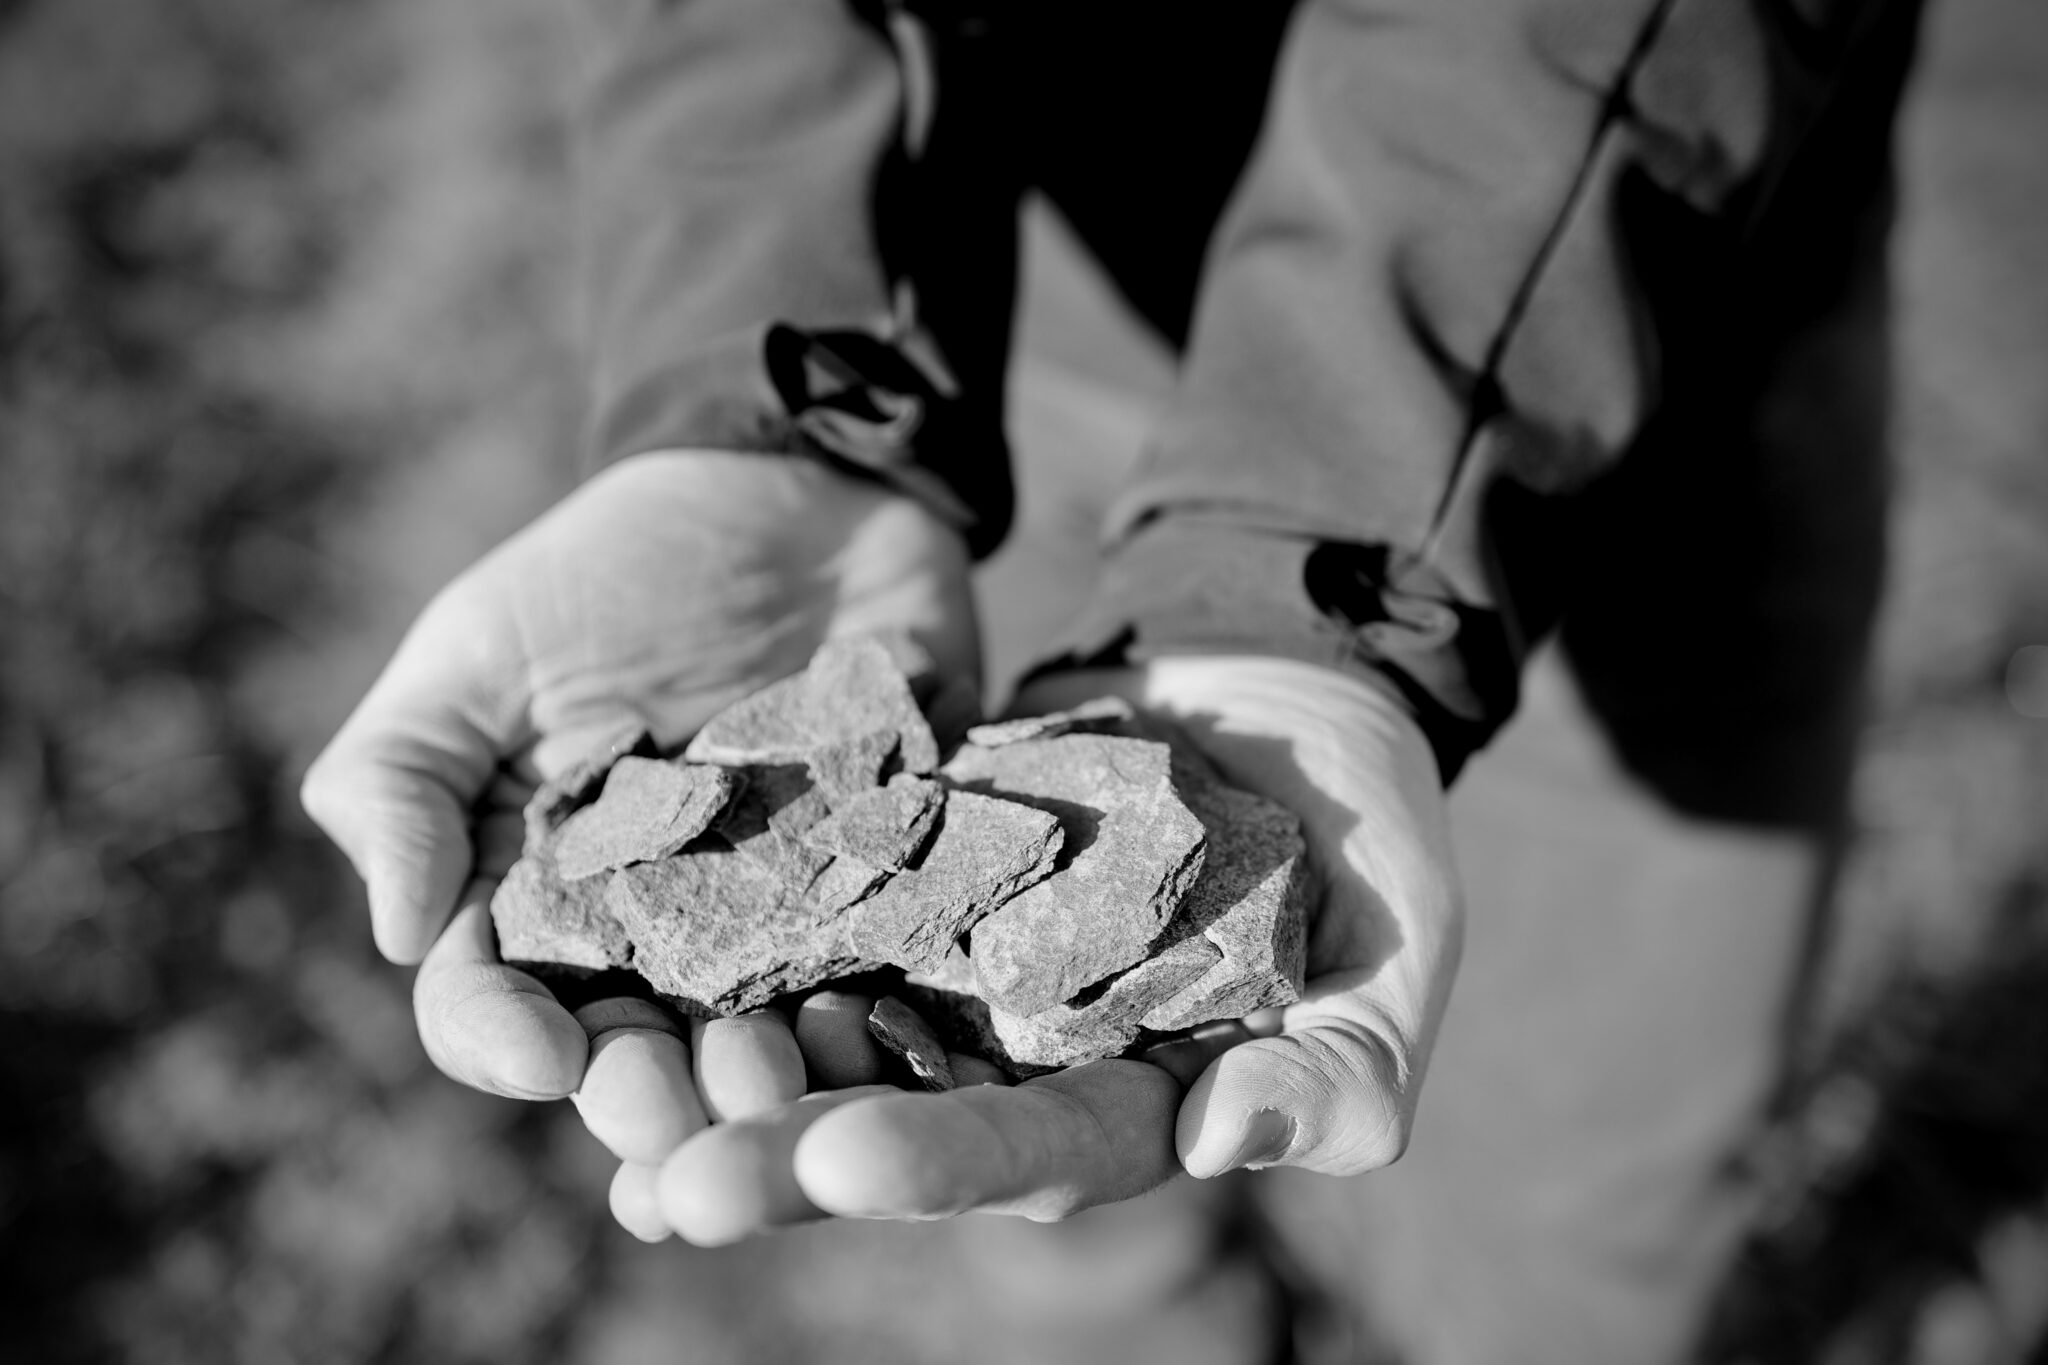 Hands holding crushed stones in black and white.